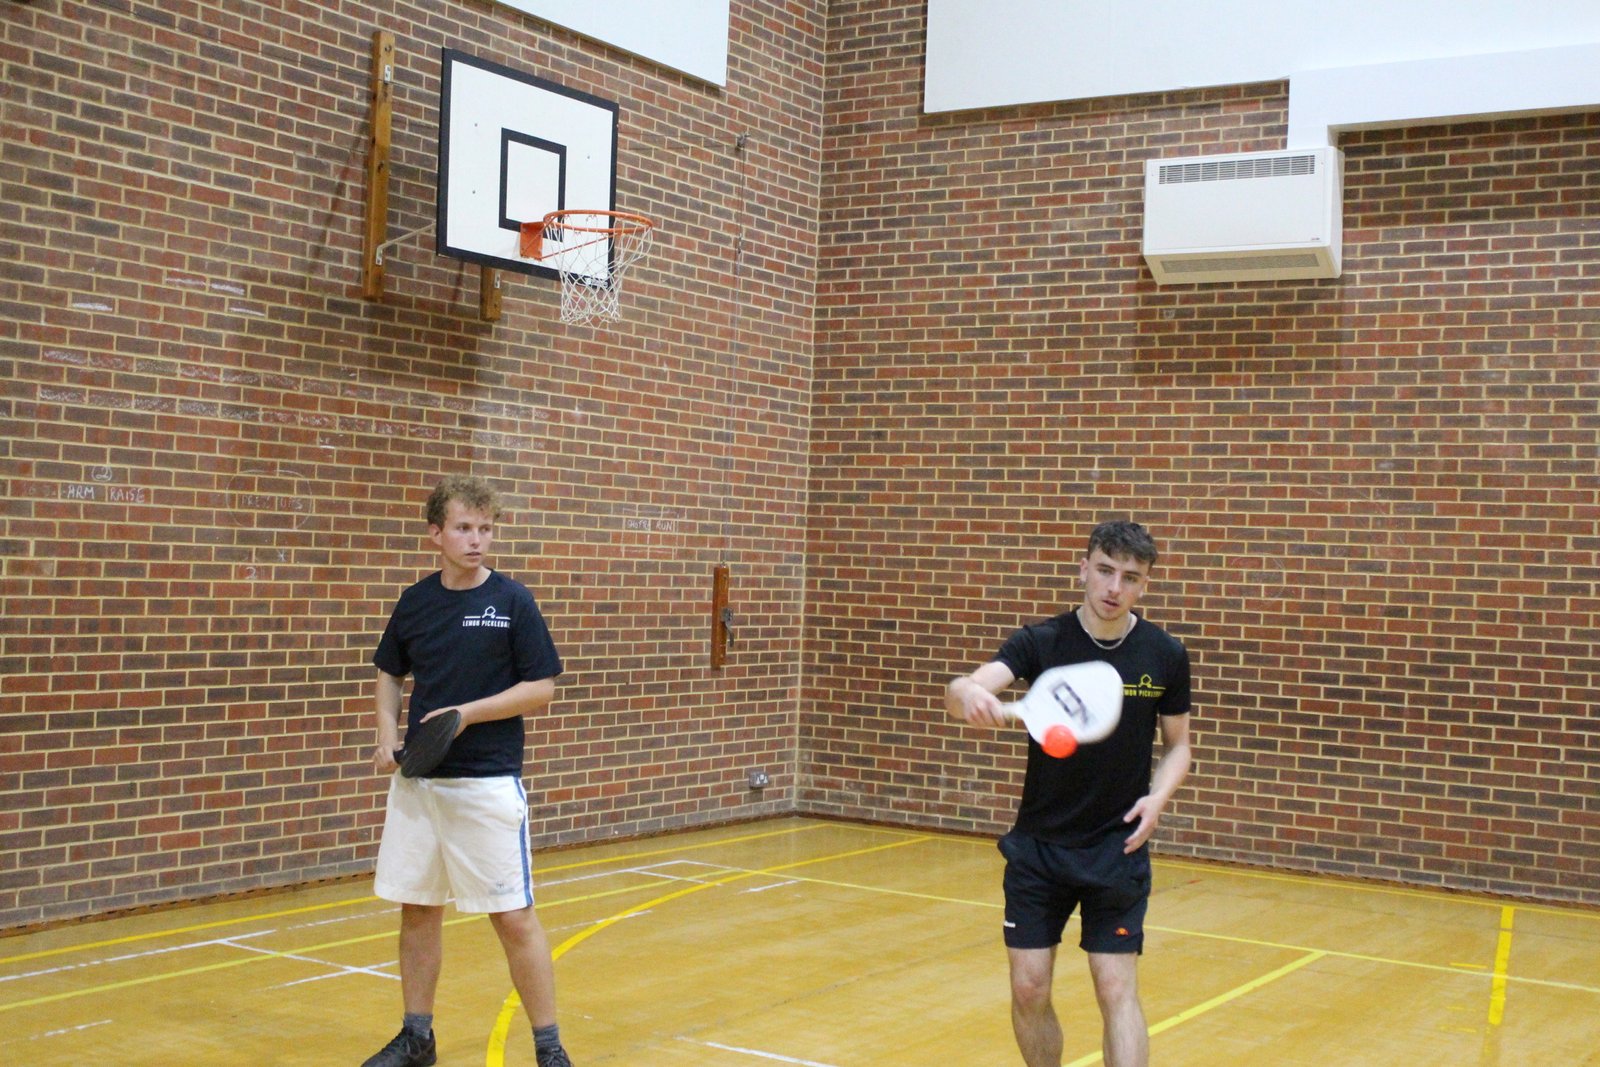 Alex playing pickleball in Finchley, hitting a backhand volley